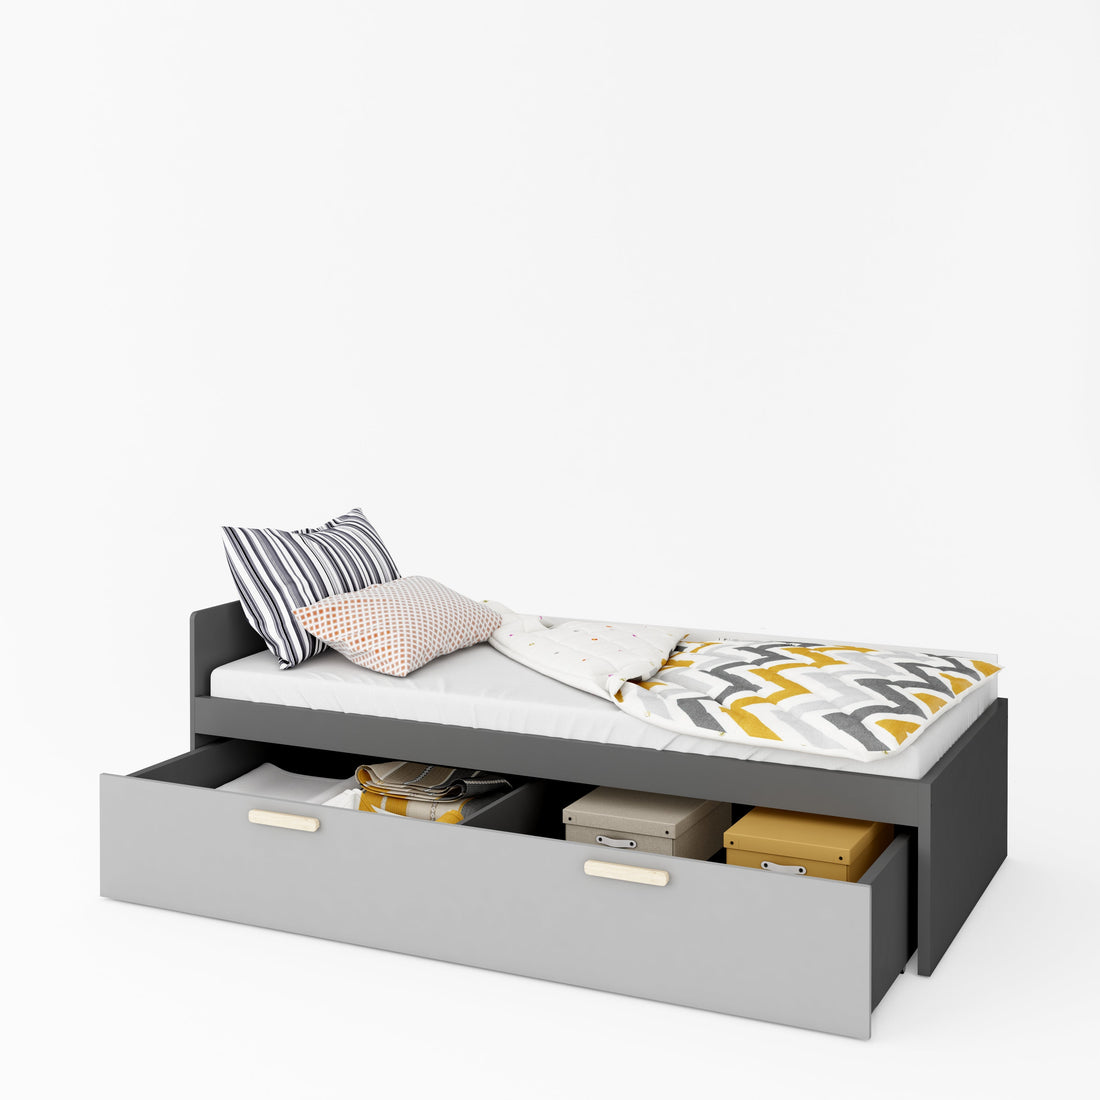 Pok PO-13 Bed with Drawer - £379.8 - Kids Single Bed 